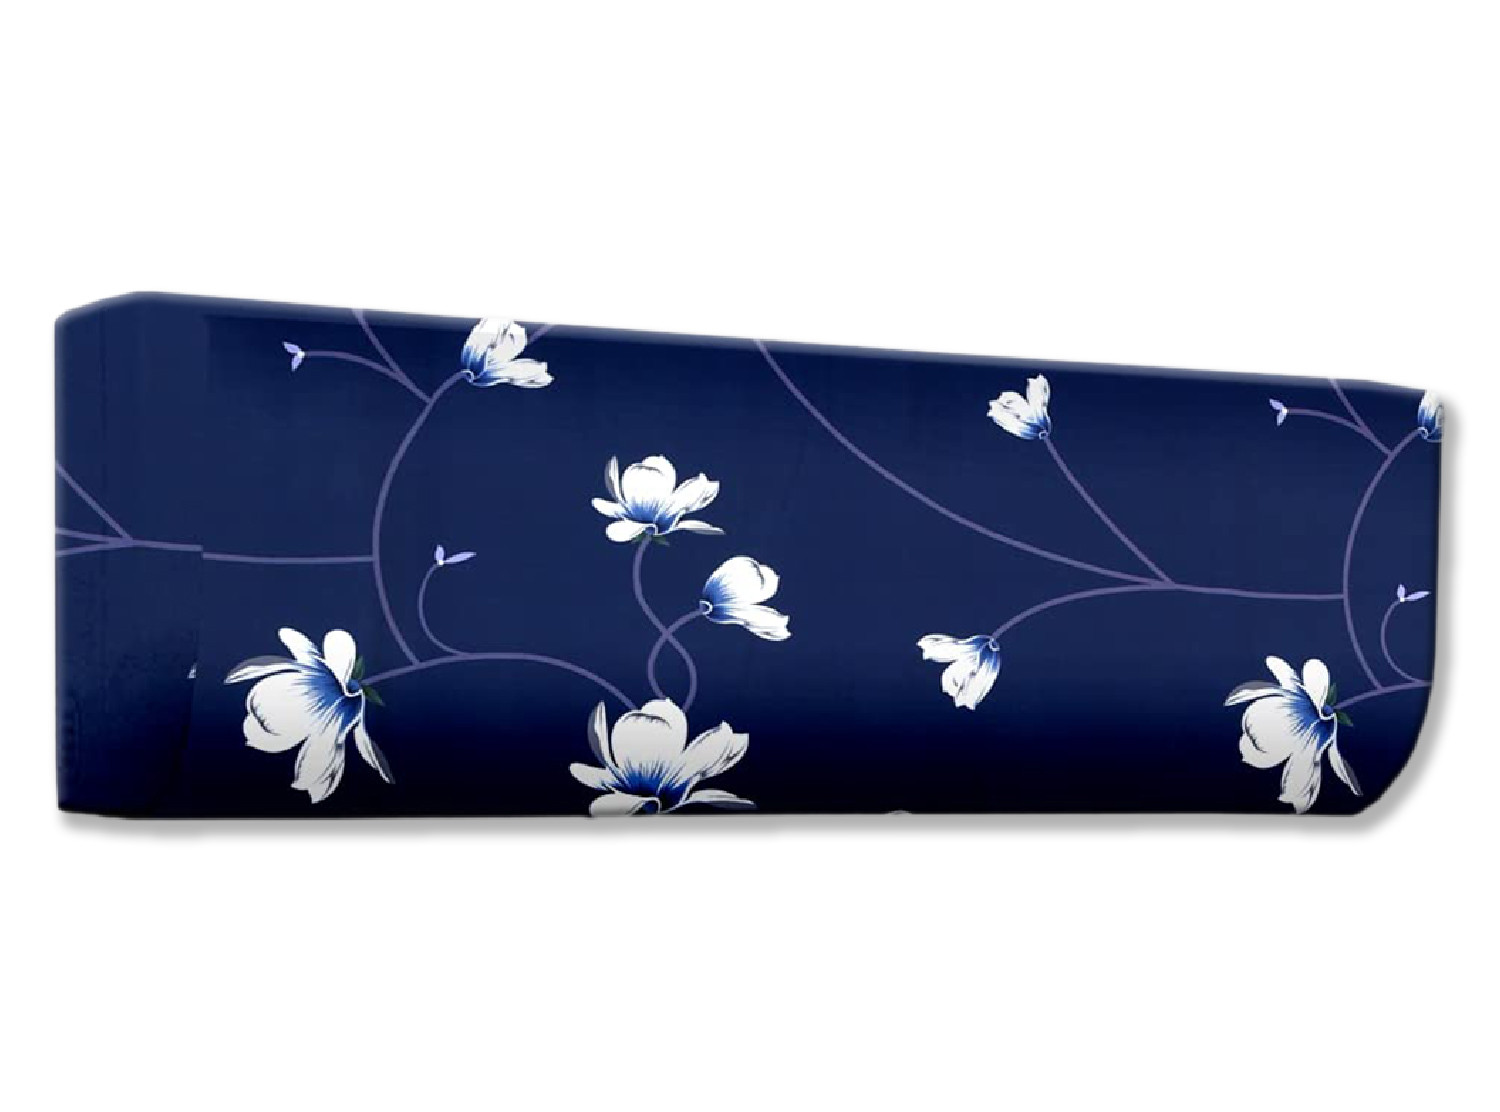 Kuber Industries AC Cover|Attractive Floral Print 1.5 Ton|All Weather Friendly|Stretchable Fabric & Elastic Closure, (Navy Blue)